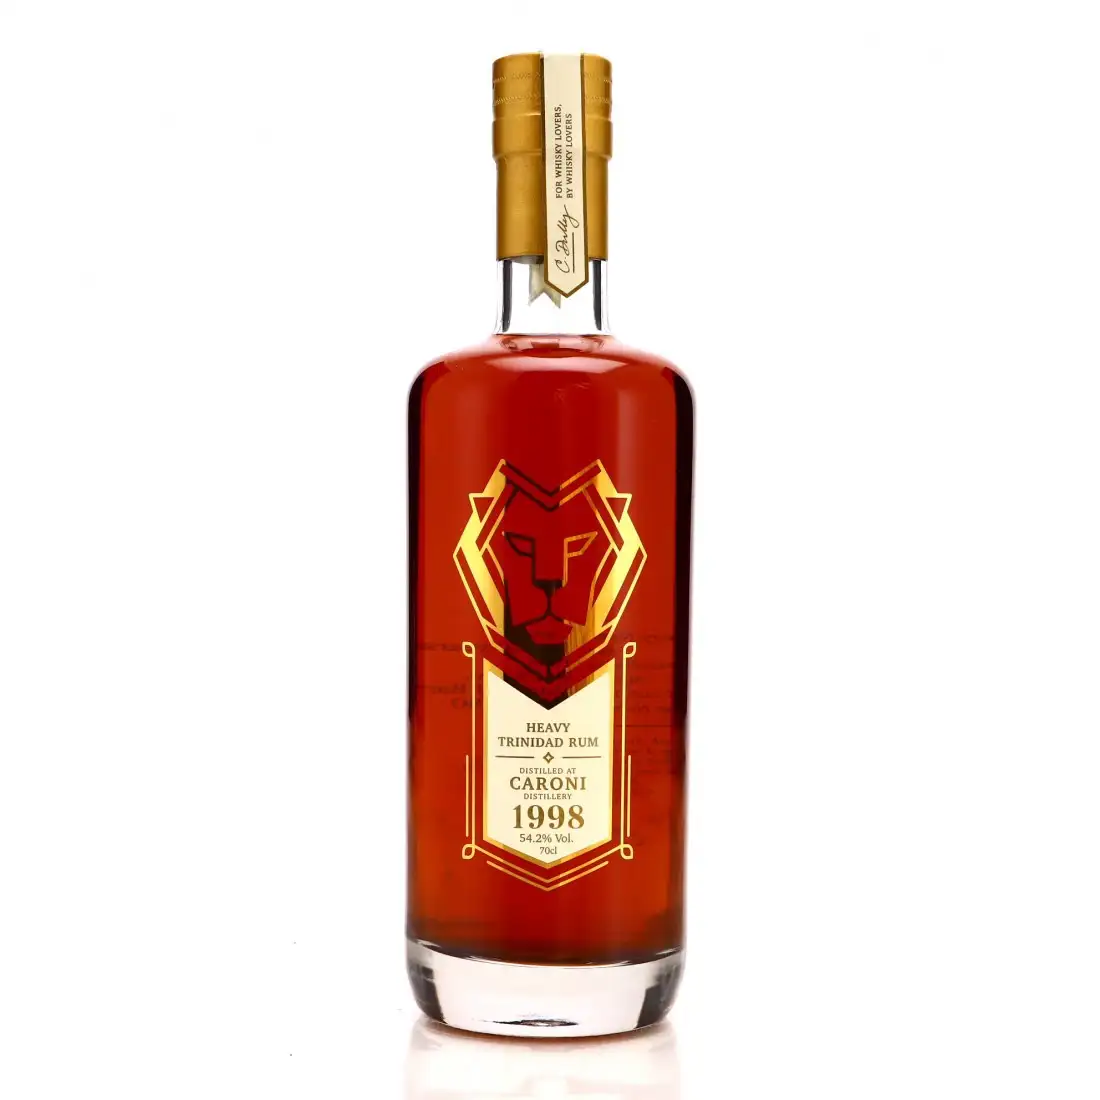 Image of the front of the bottle of the rum Heavy Trinidad Rum